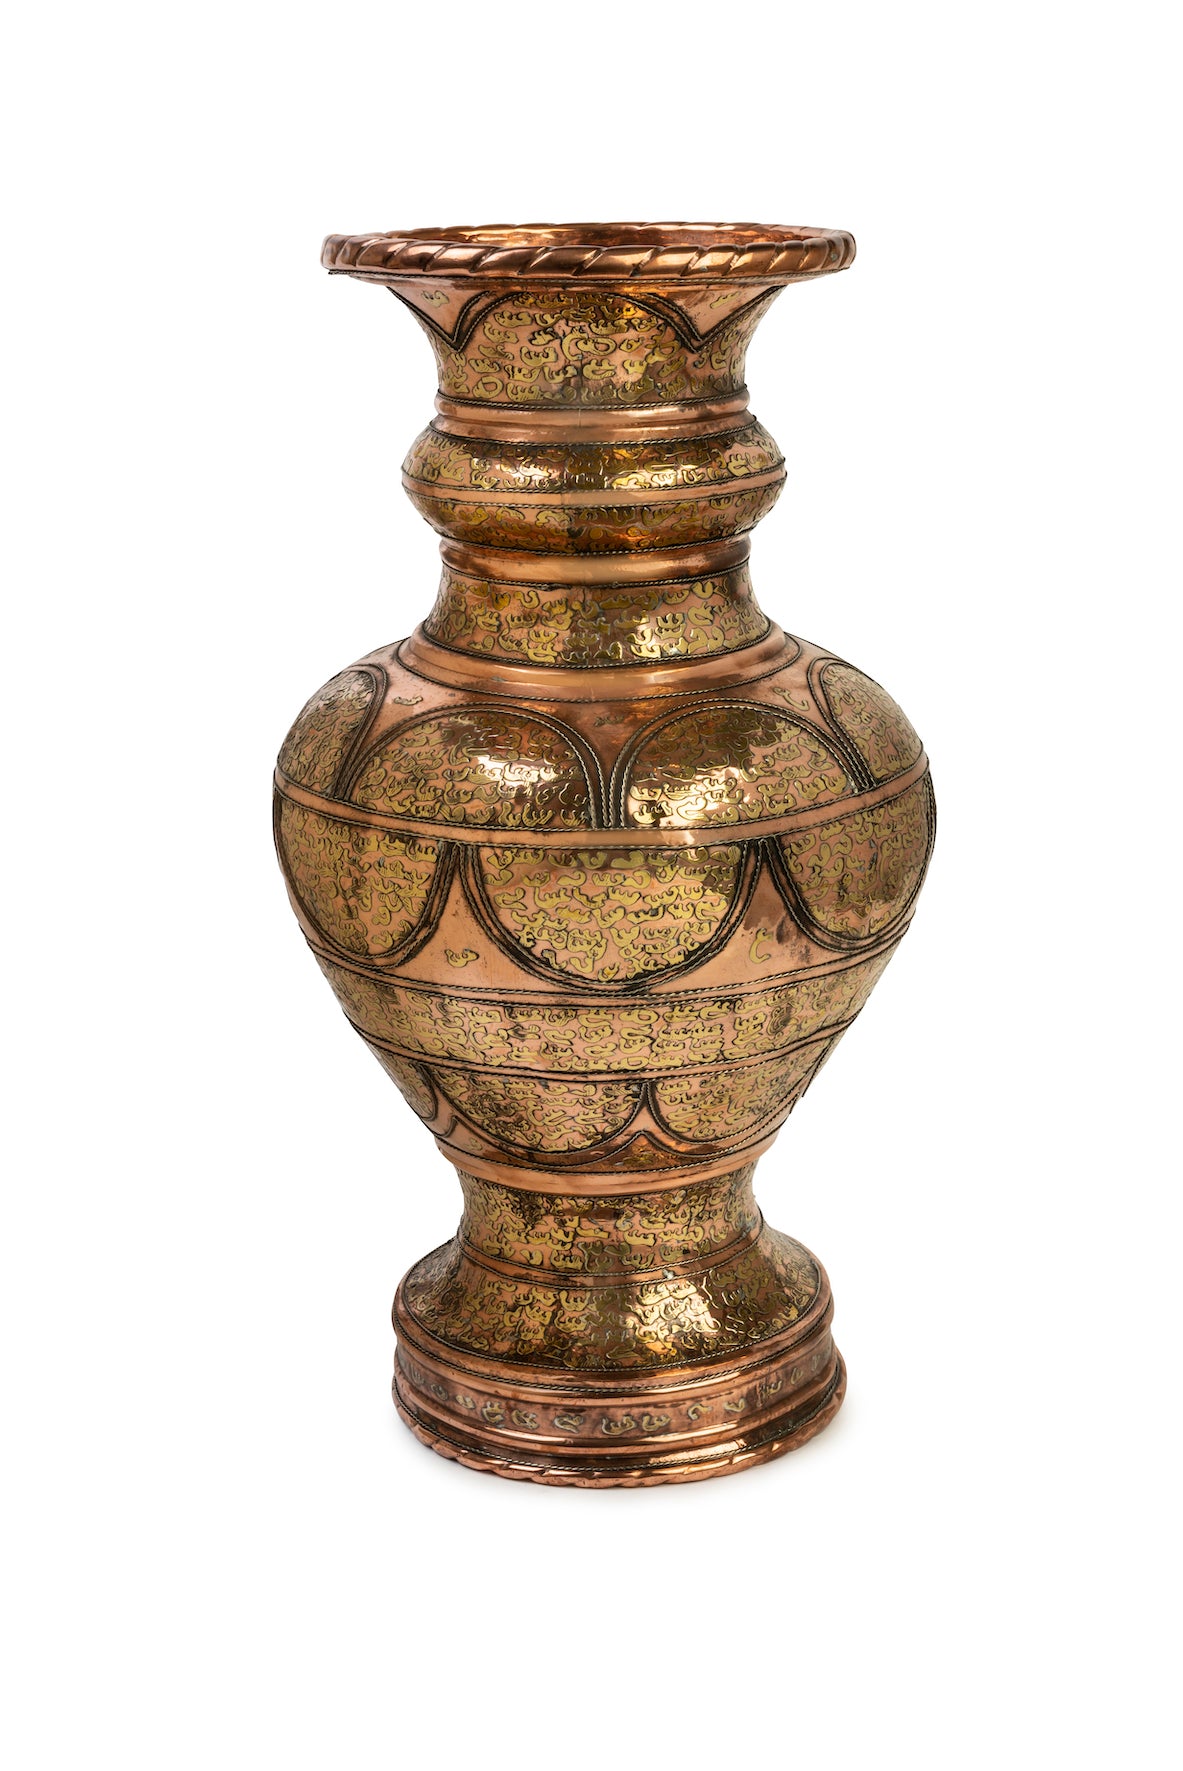 SOLD A fabulous large mixed-metal baluster shaped vase, Middle Eastern 19th Century